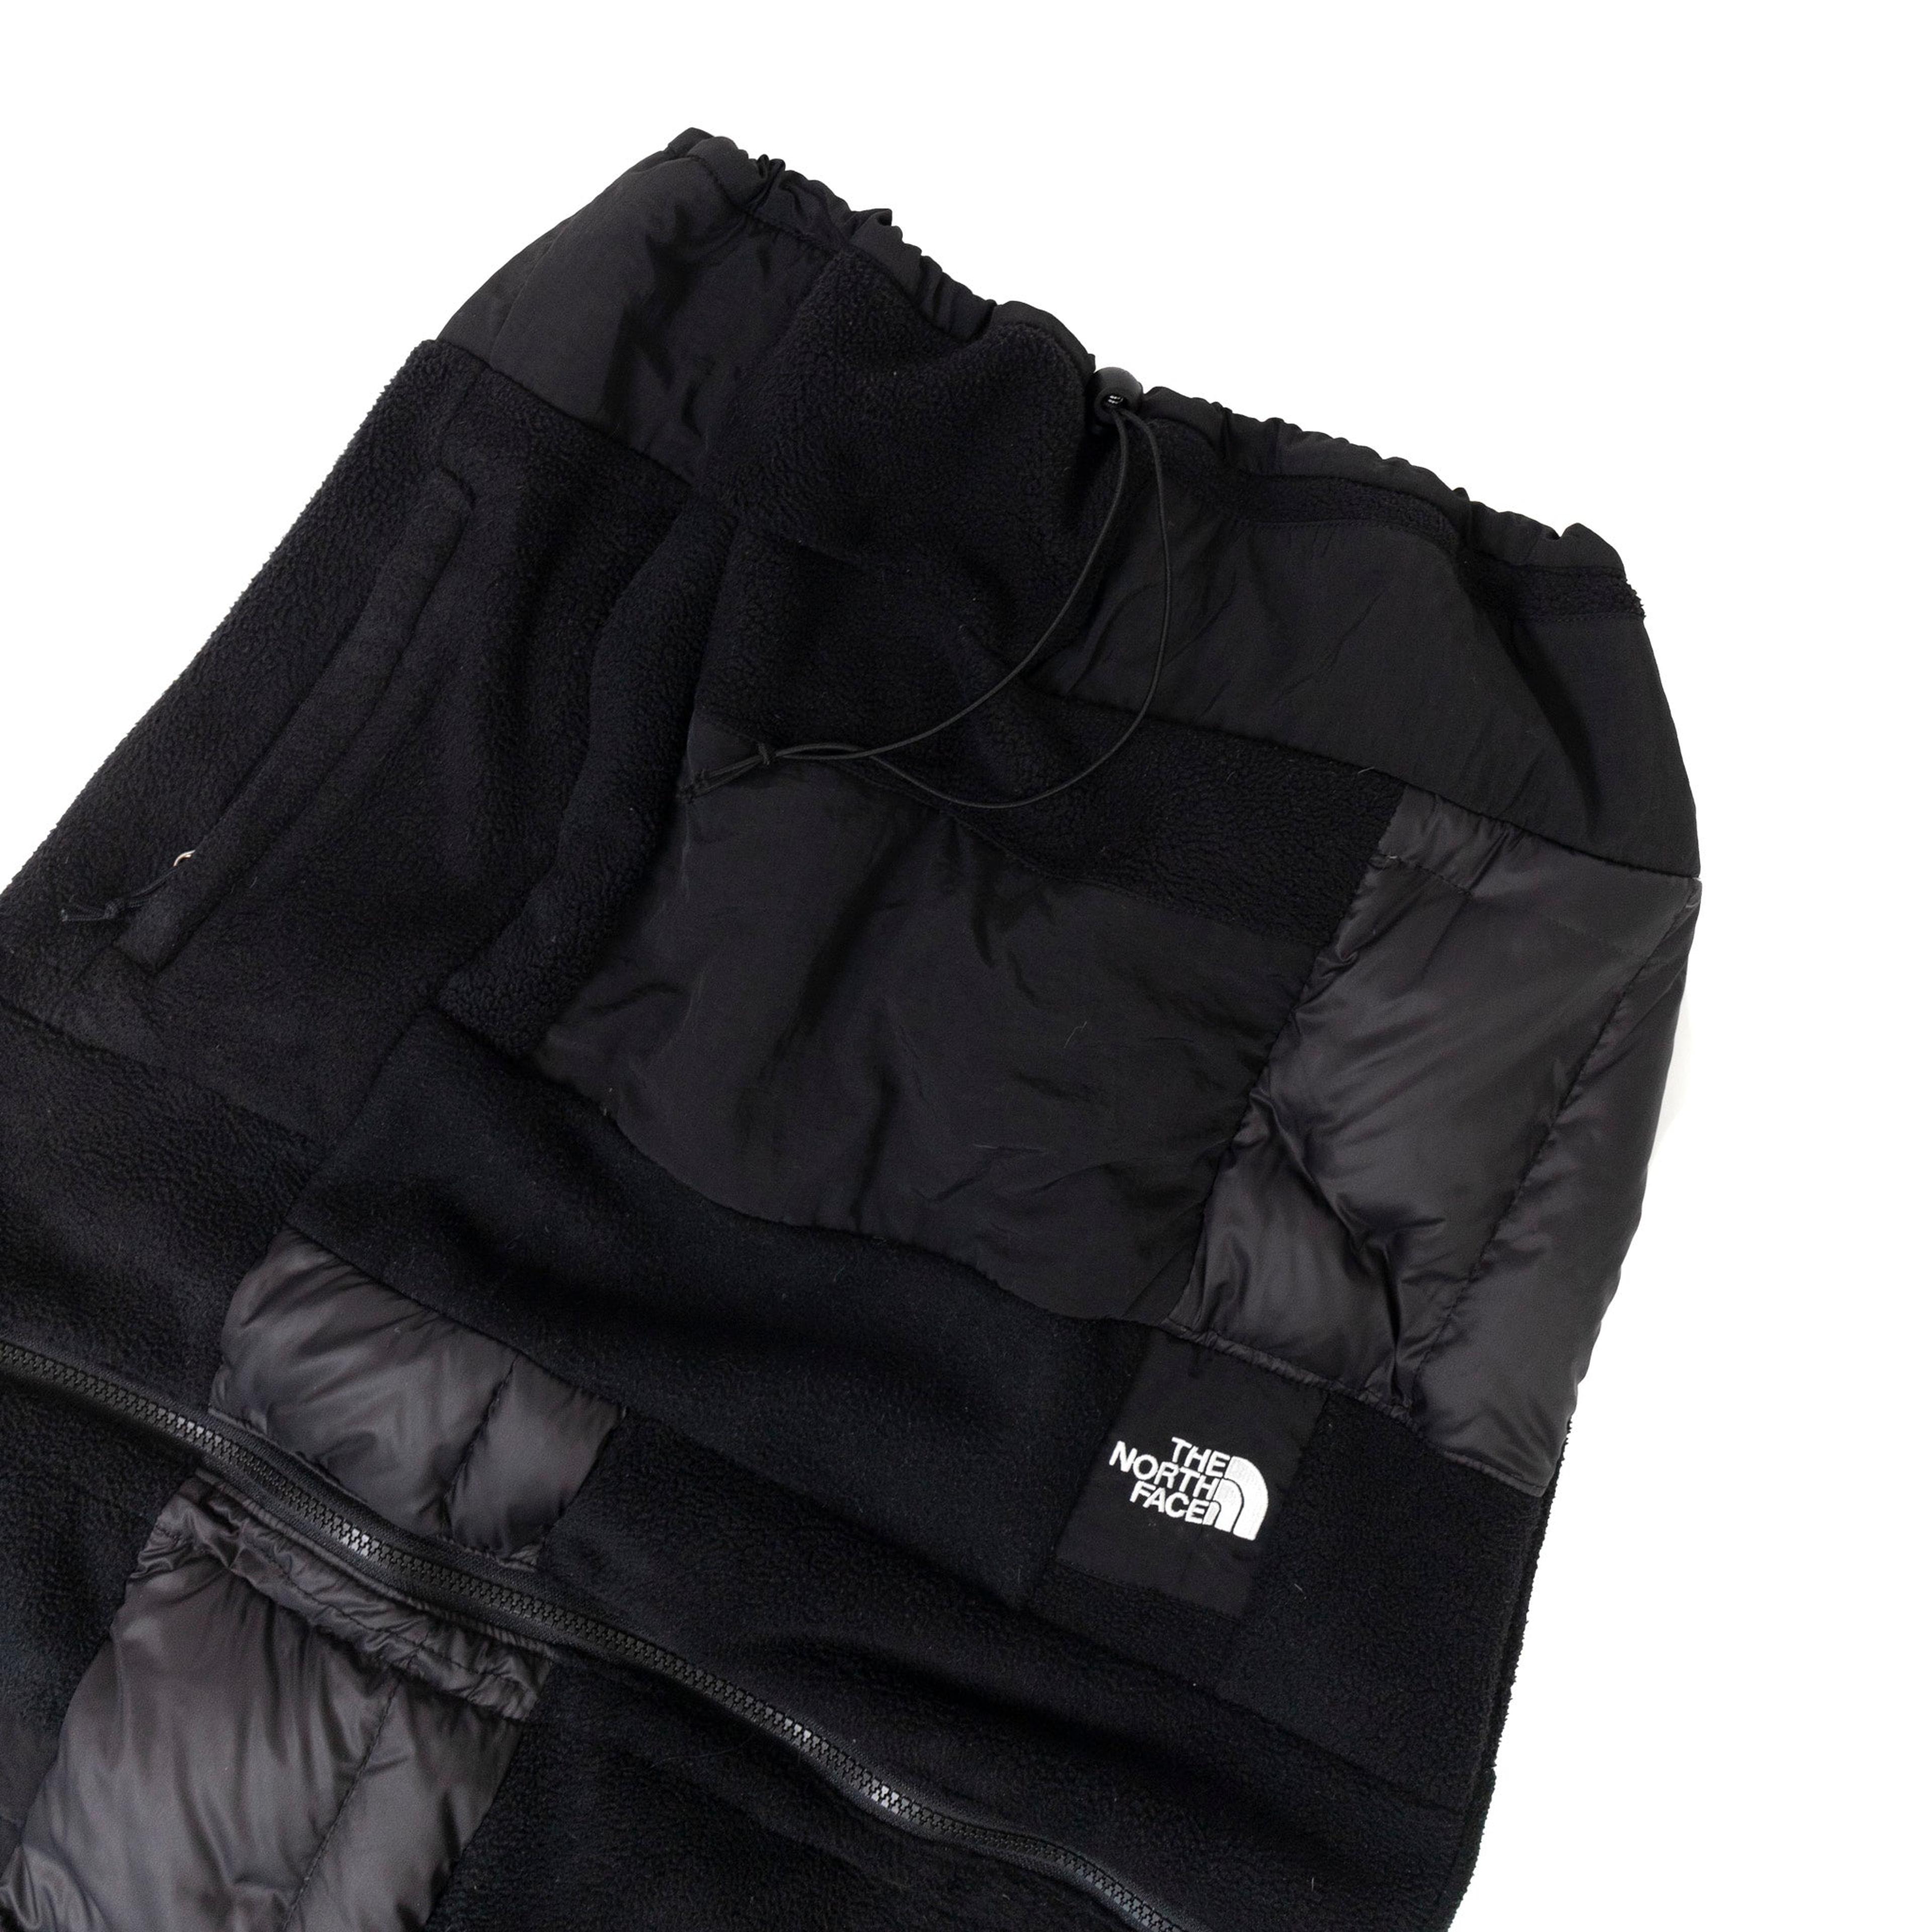 Alternate View 1 of VT Rework: The North Face Technical Skirt